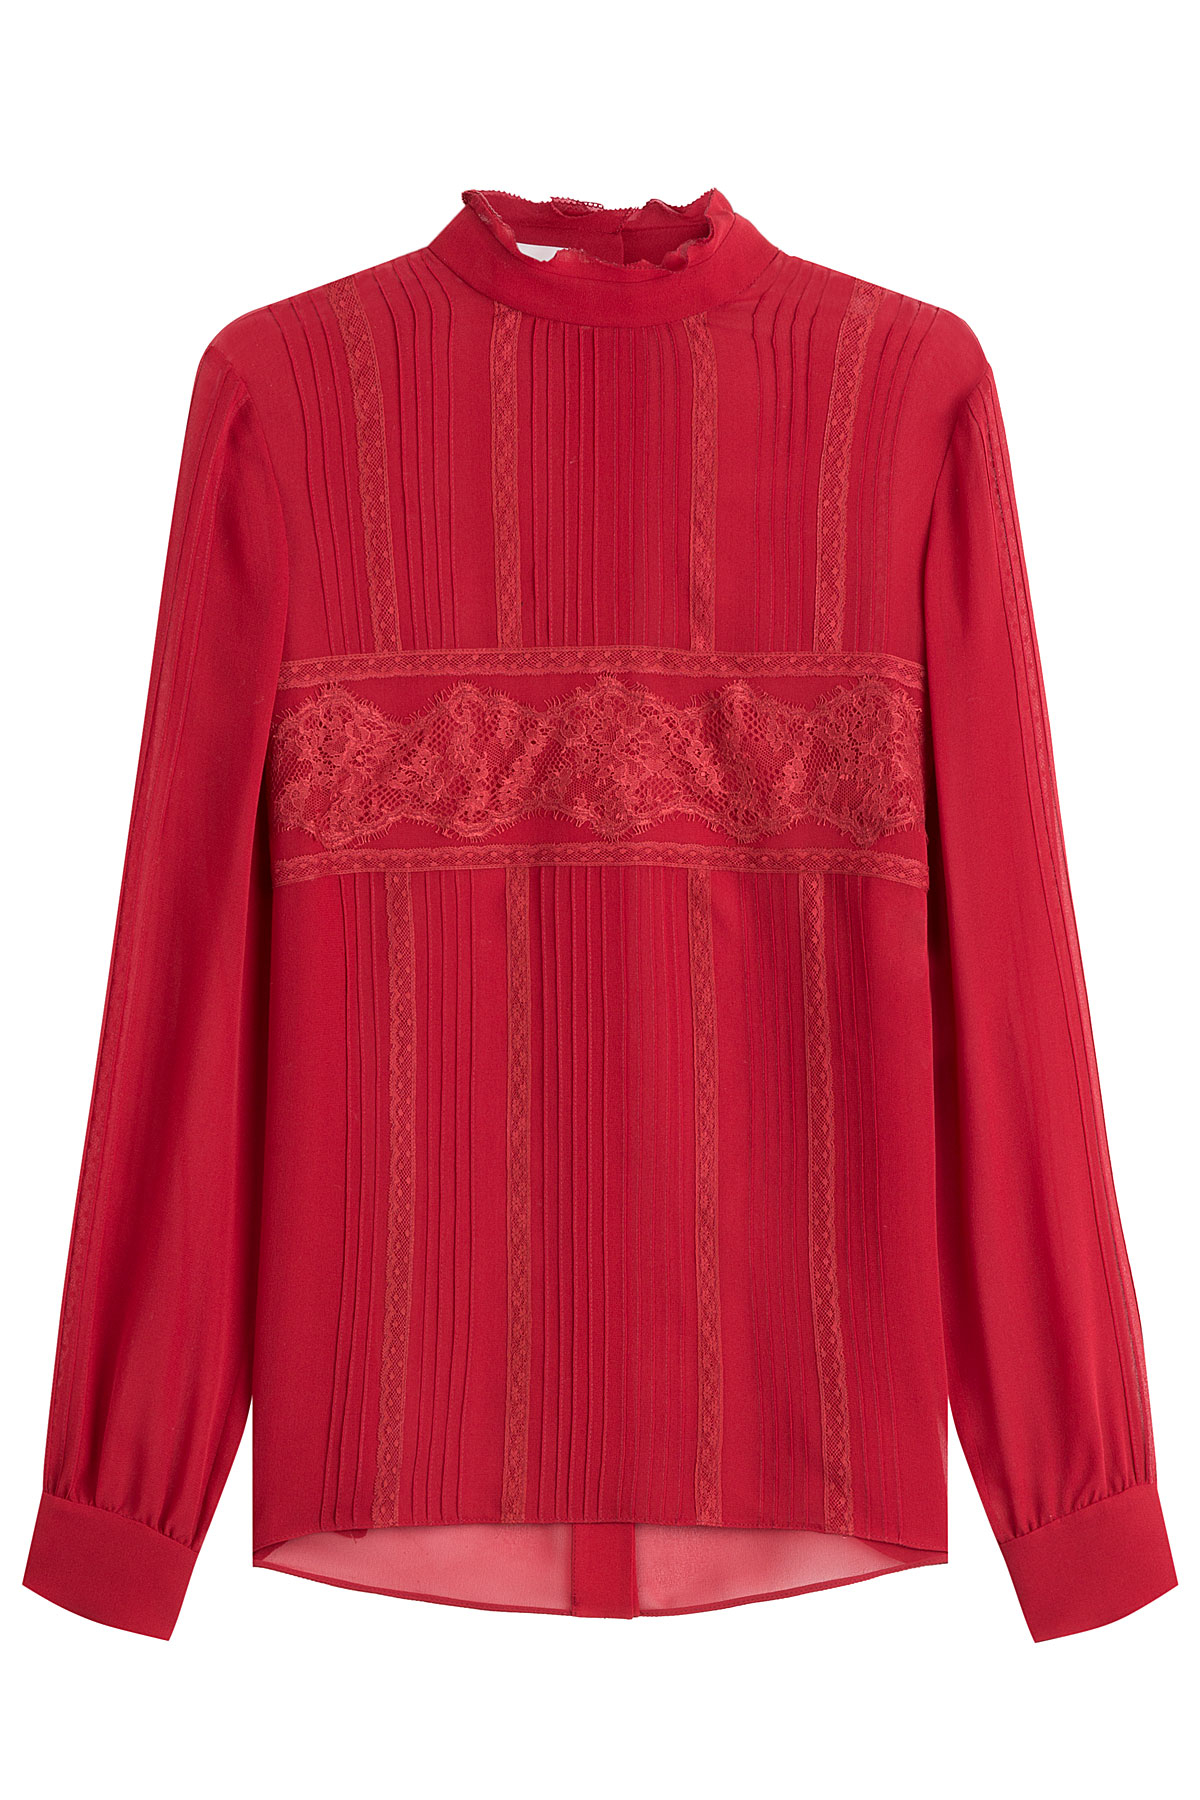 Lyst - Valentino Silk Blouse With Lace - Red in Red